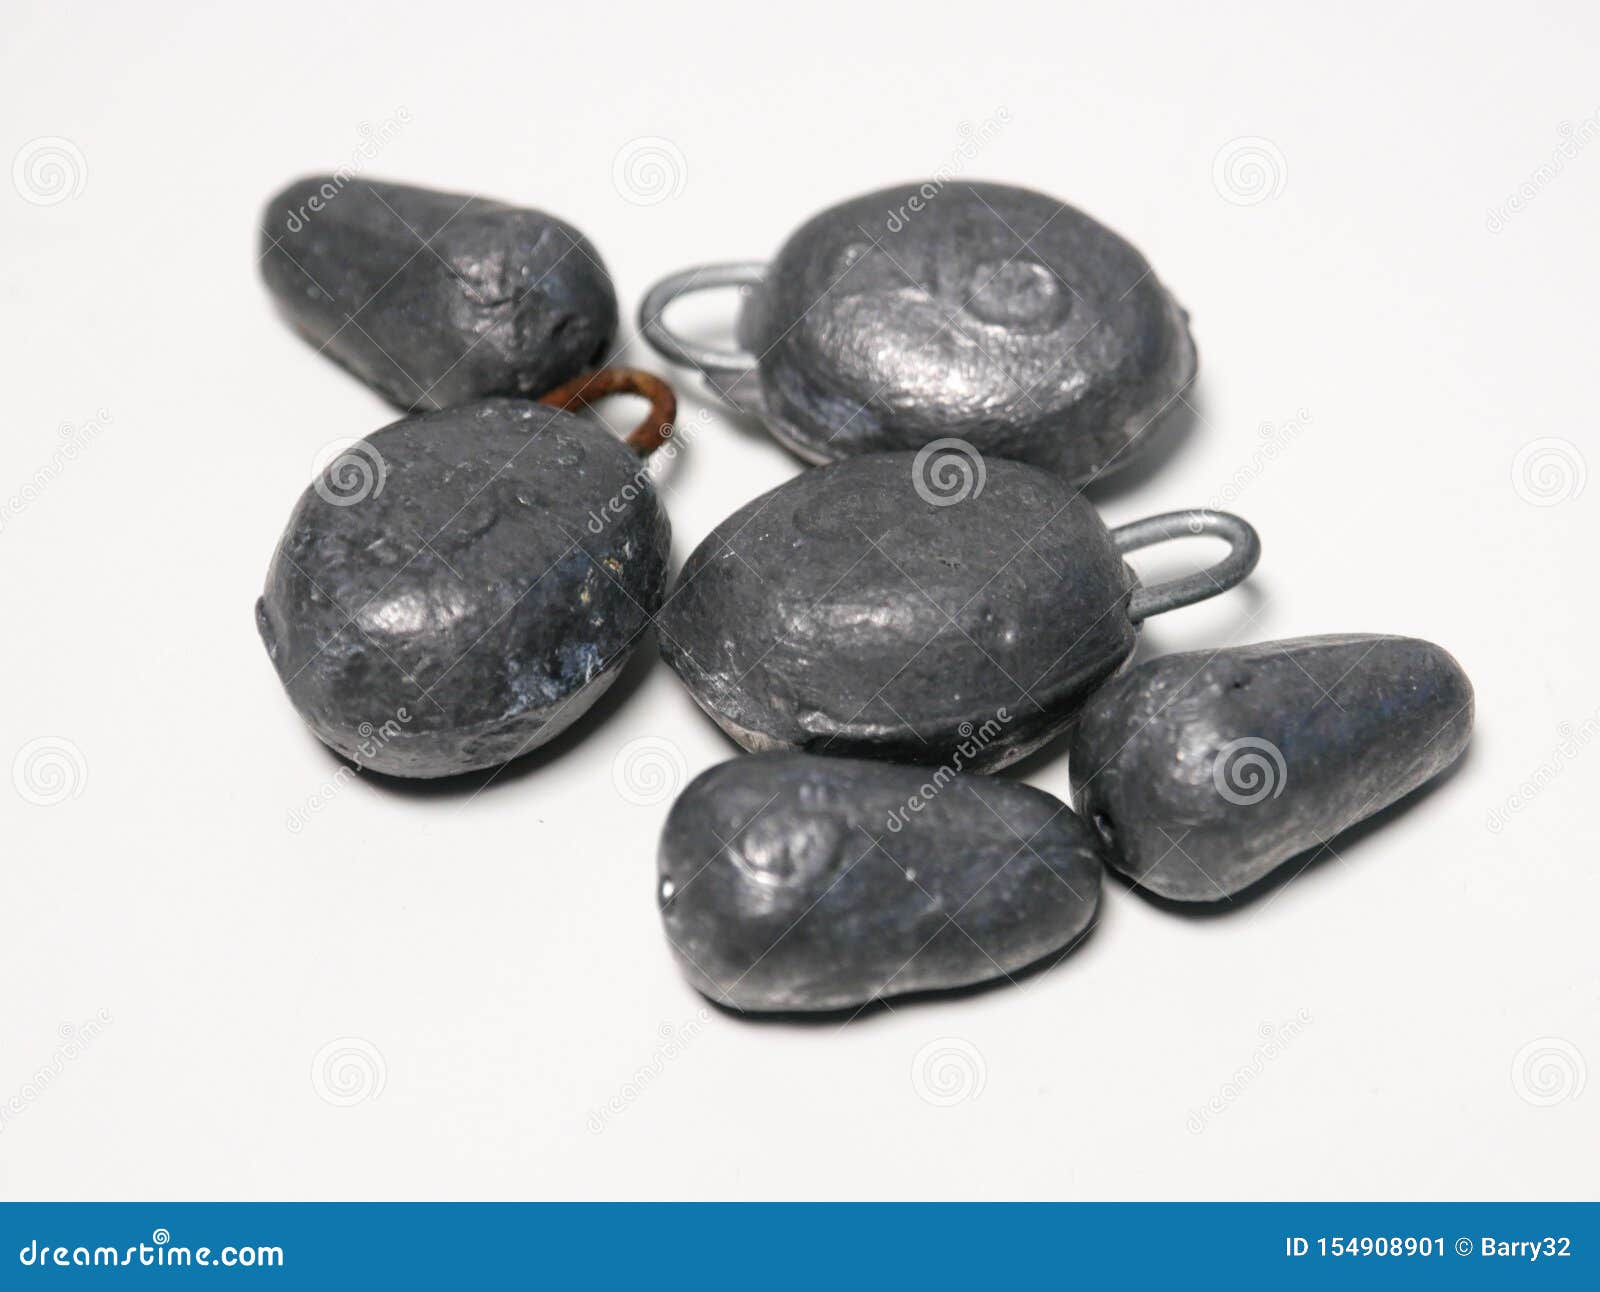 https://thumbs.dreamstime.com/z/lead-weights-used-fishing-close-up-shot-above-white-background-154908901.jpg